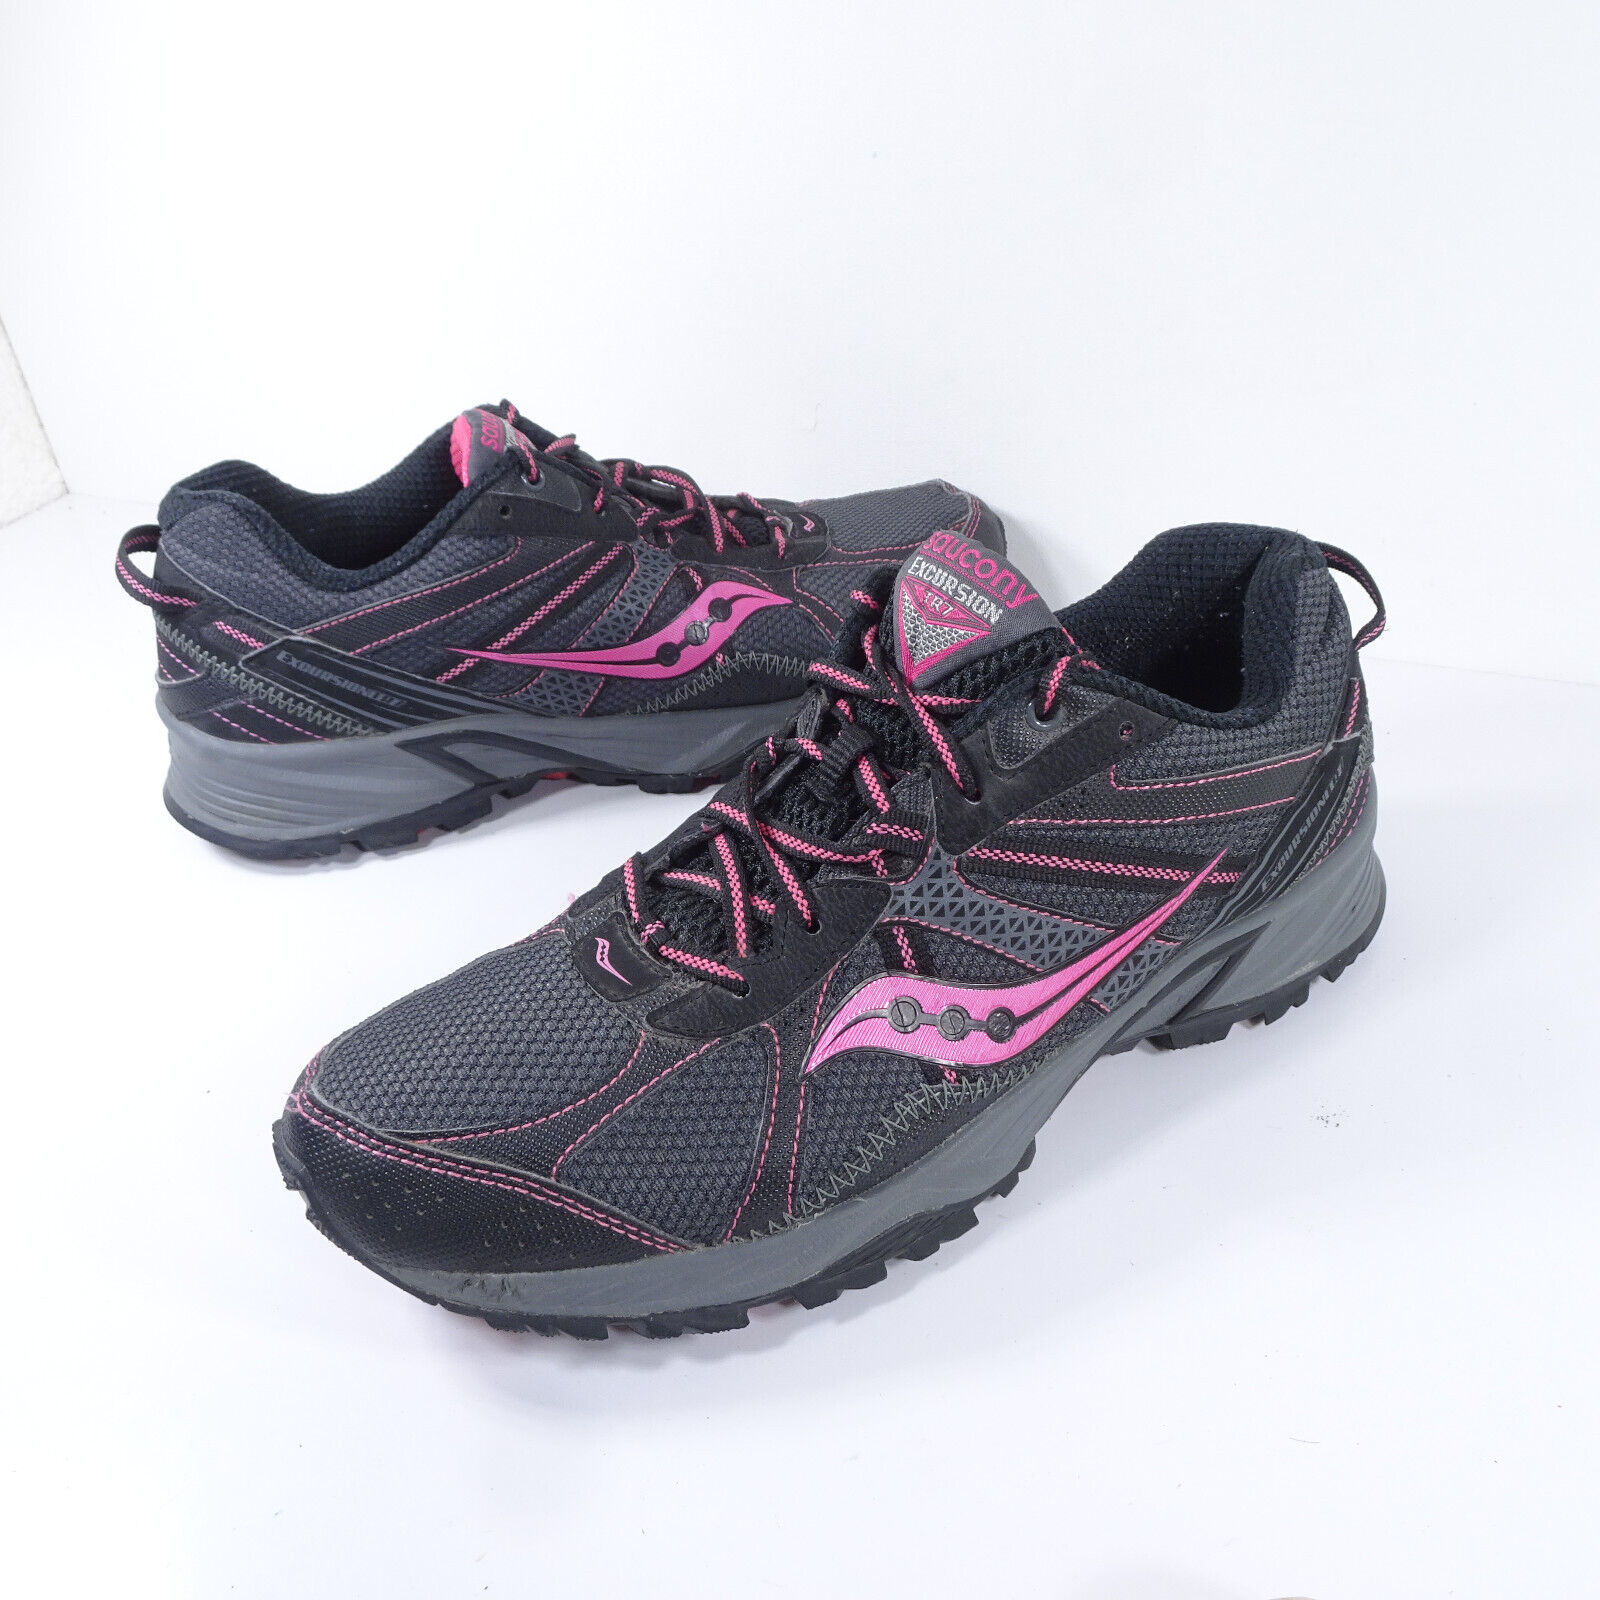 Primary image for Saucony Womens Excursion TR7 Trail Running Shoes Black Pink Size 11 15170-1